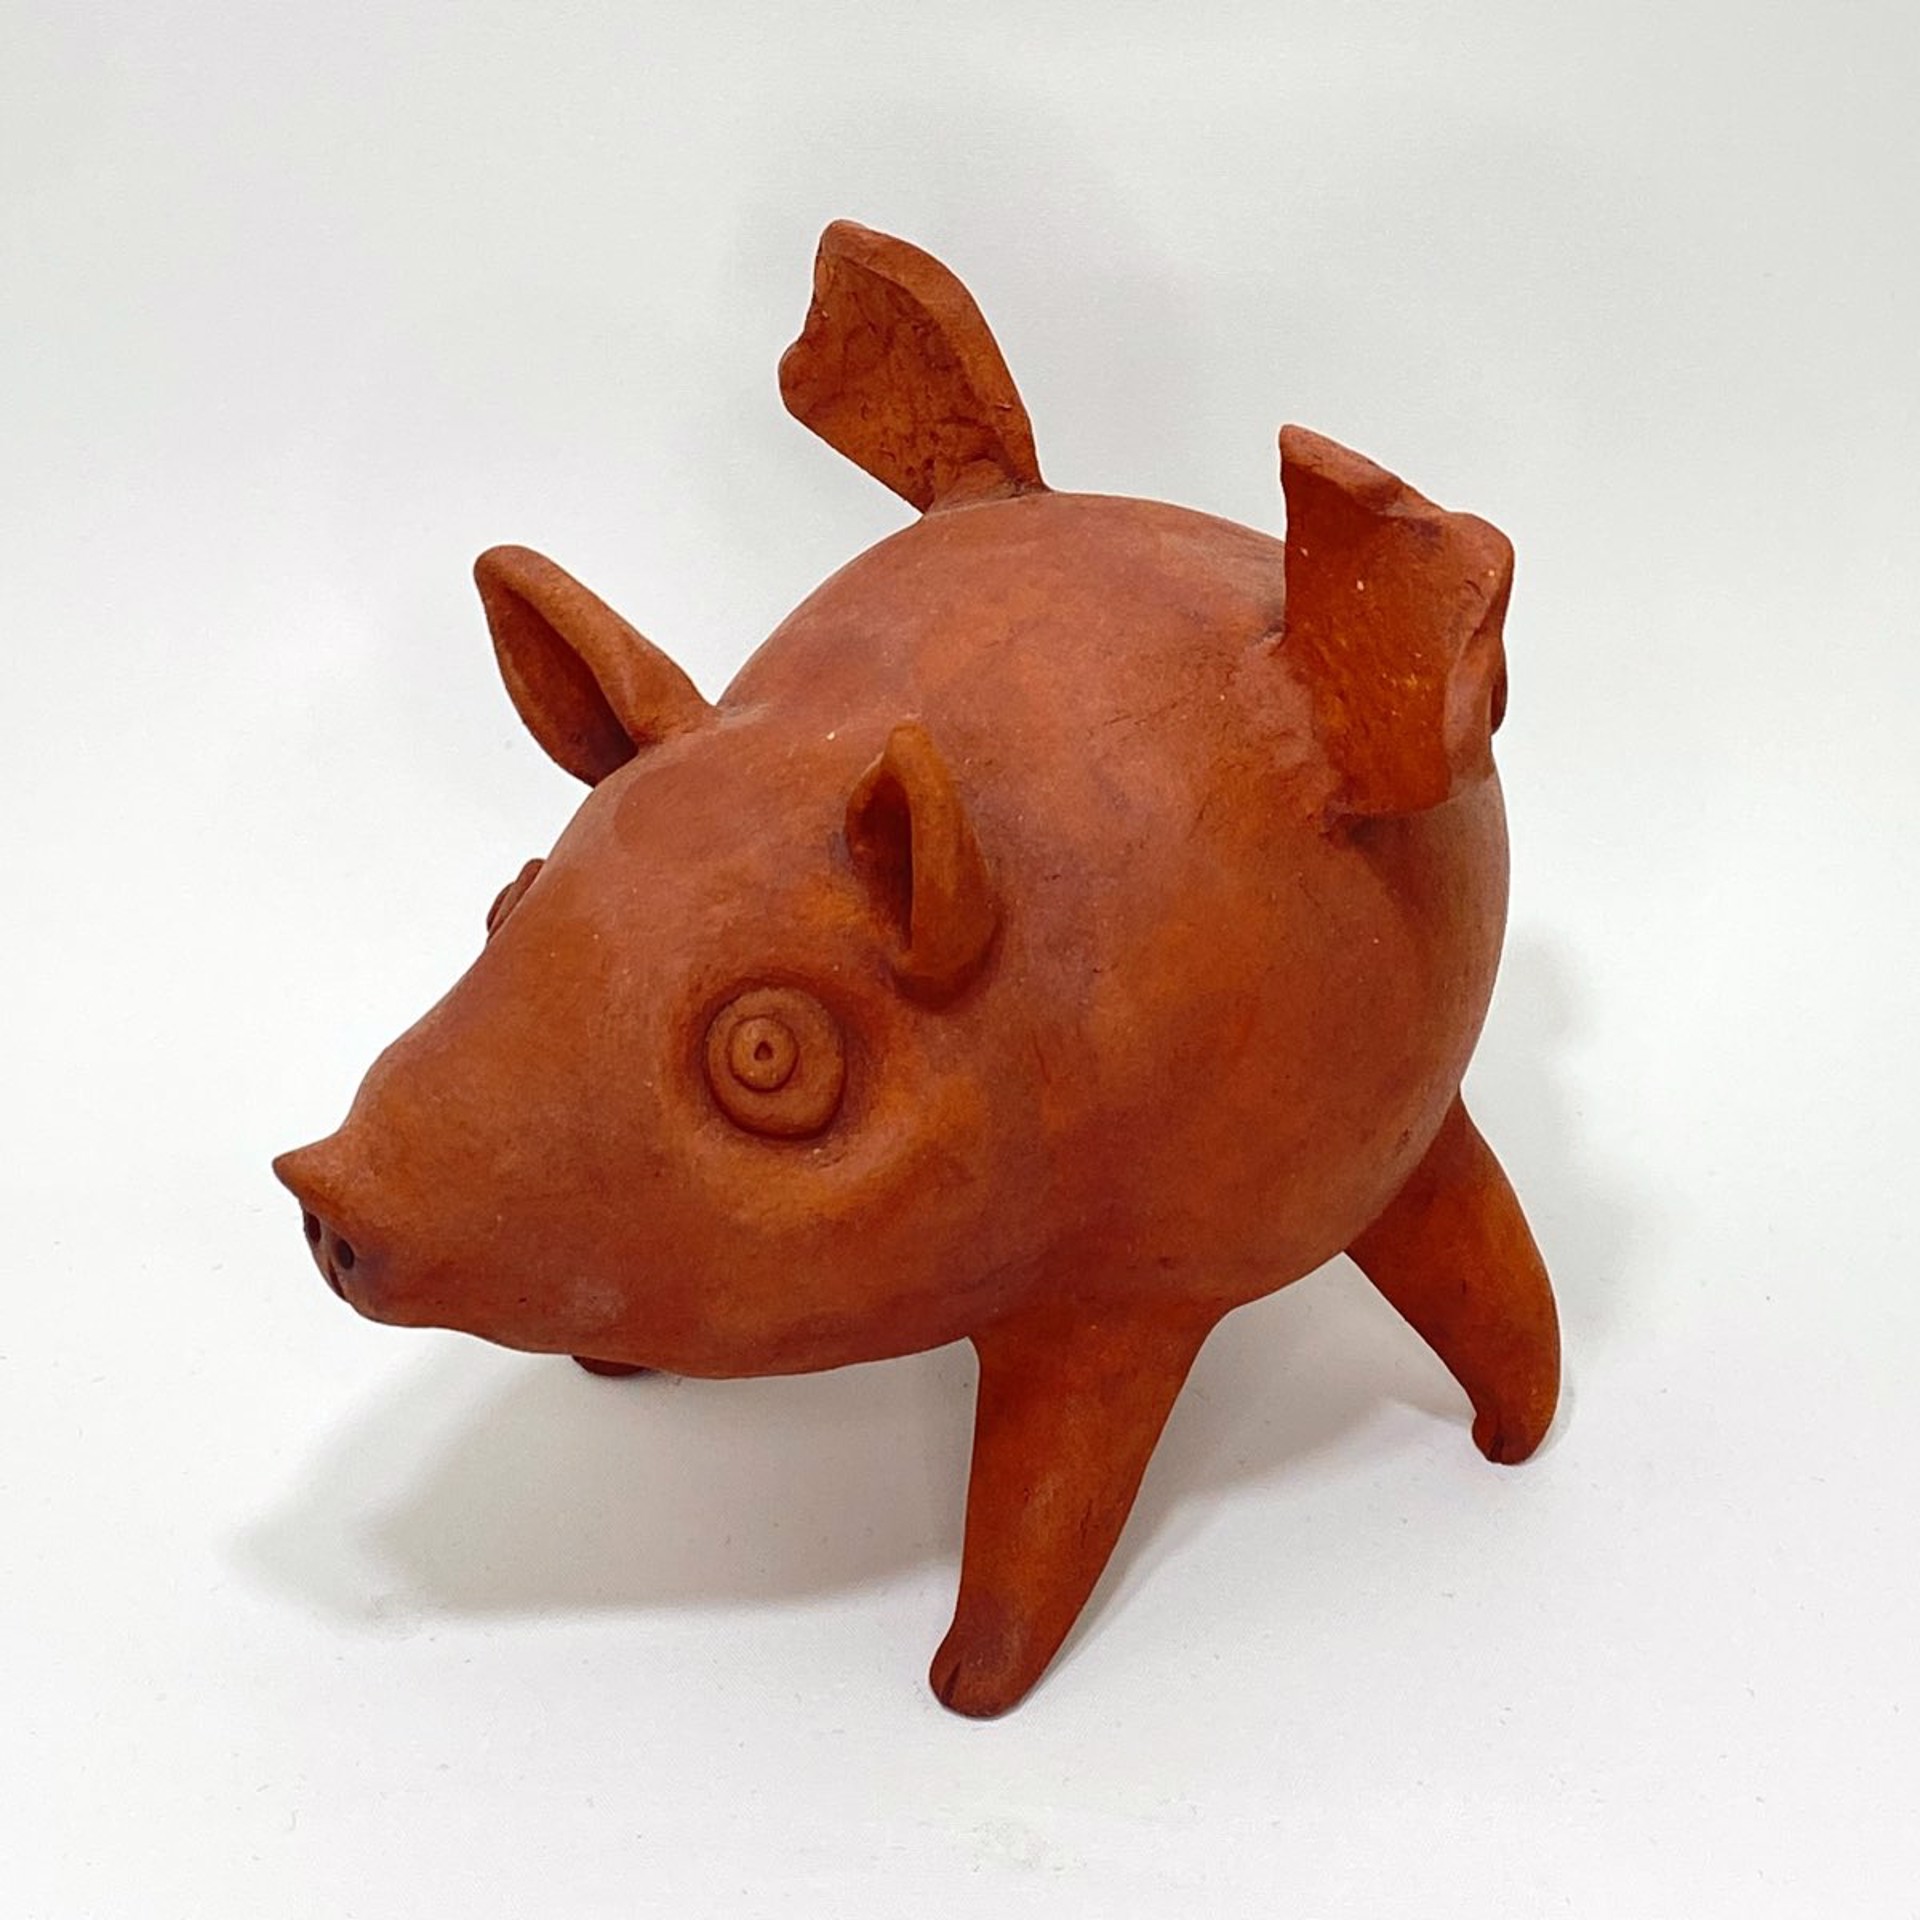 When Pigs Fly by Sue Morse